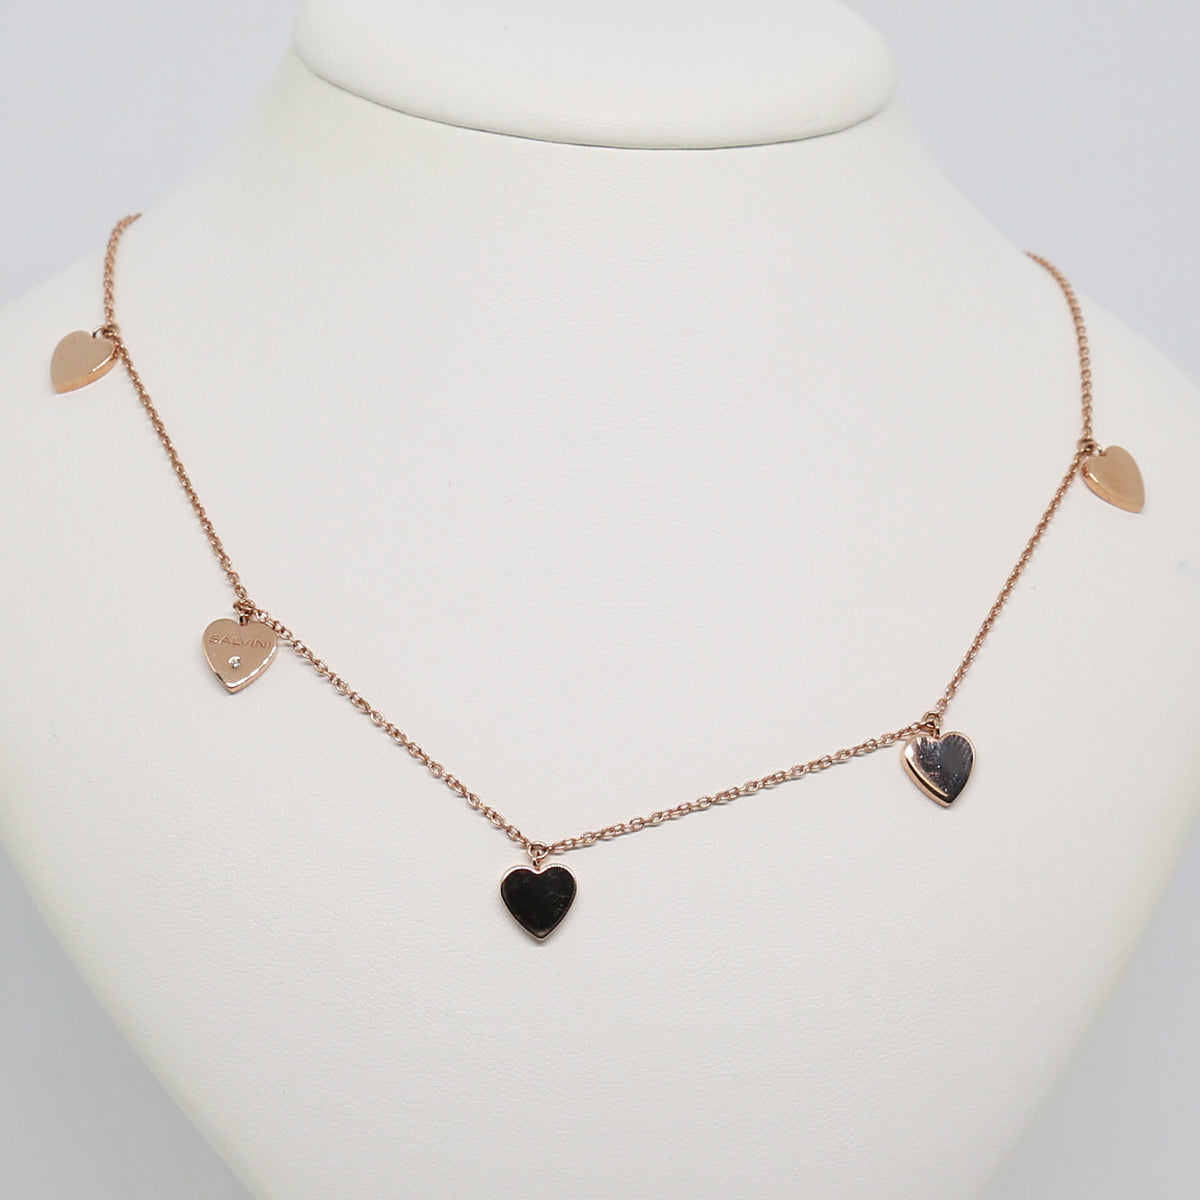 Rose gold necklace HEARTS 9kT WITH DIAMOND SALVINI 20087162